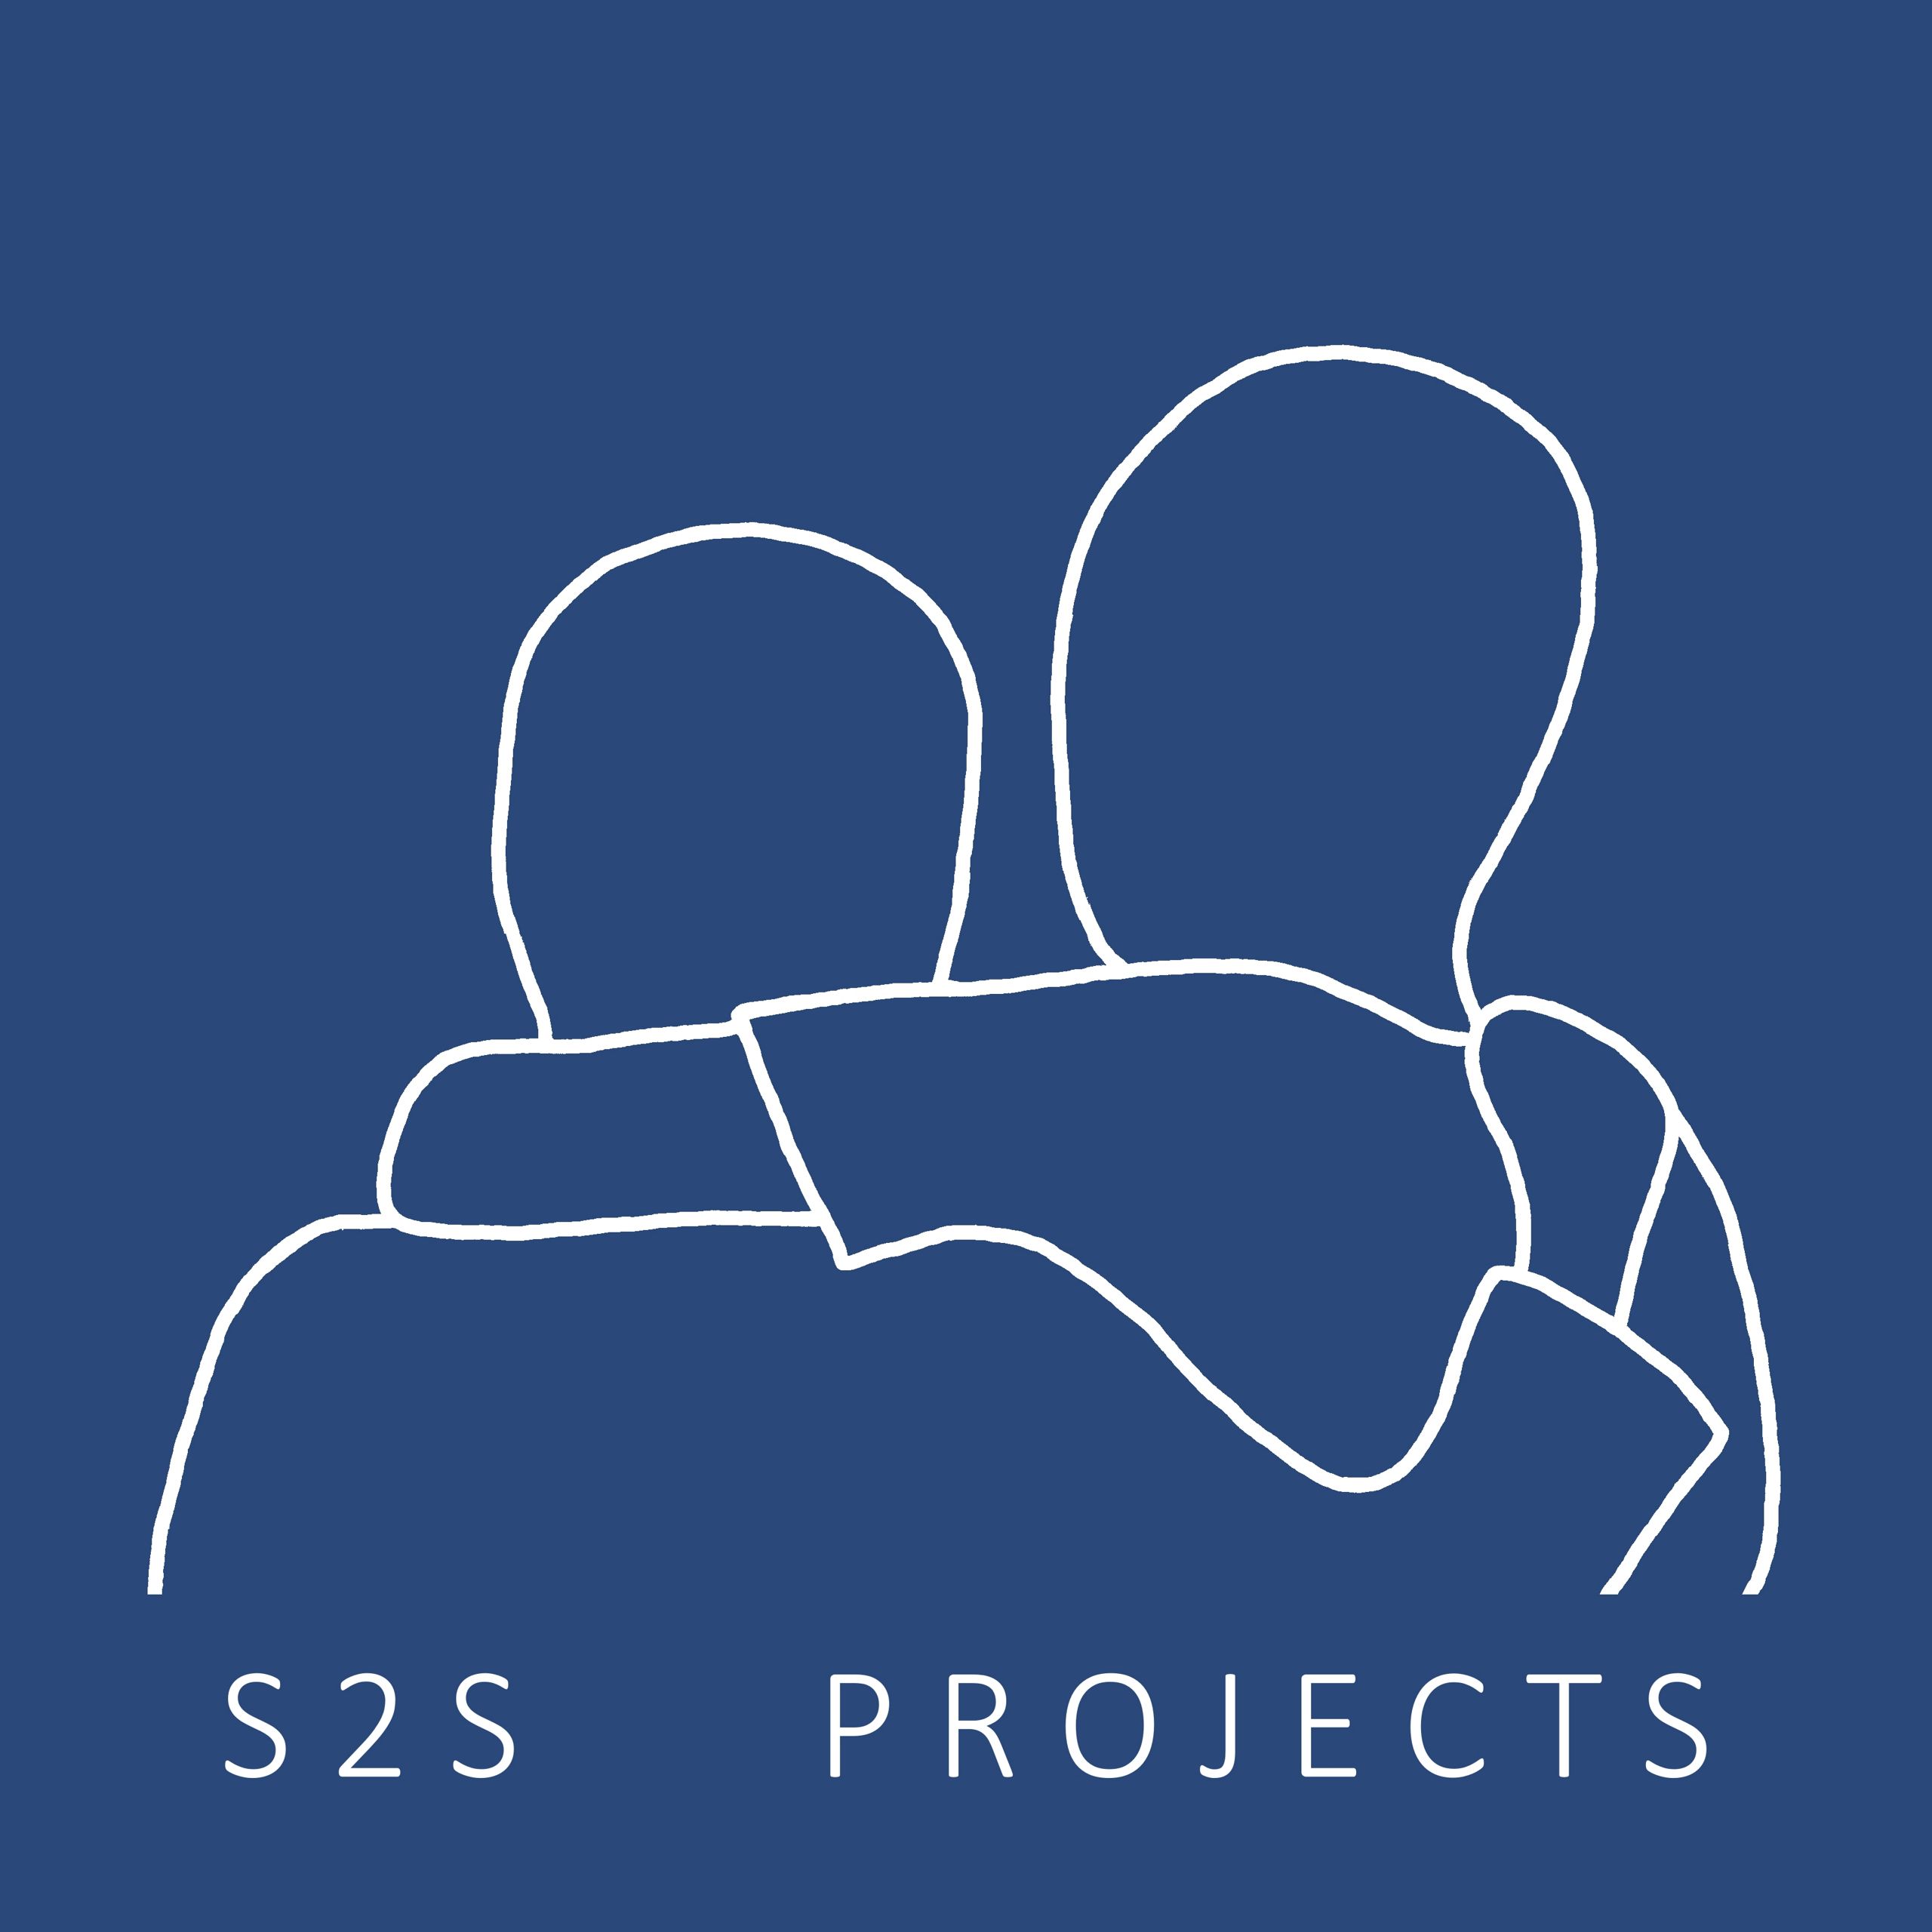 S2S projects